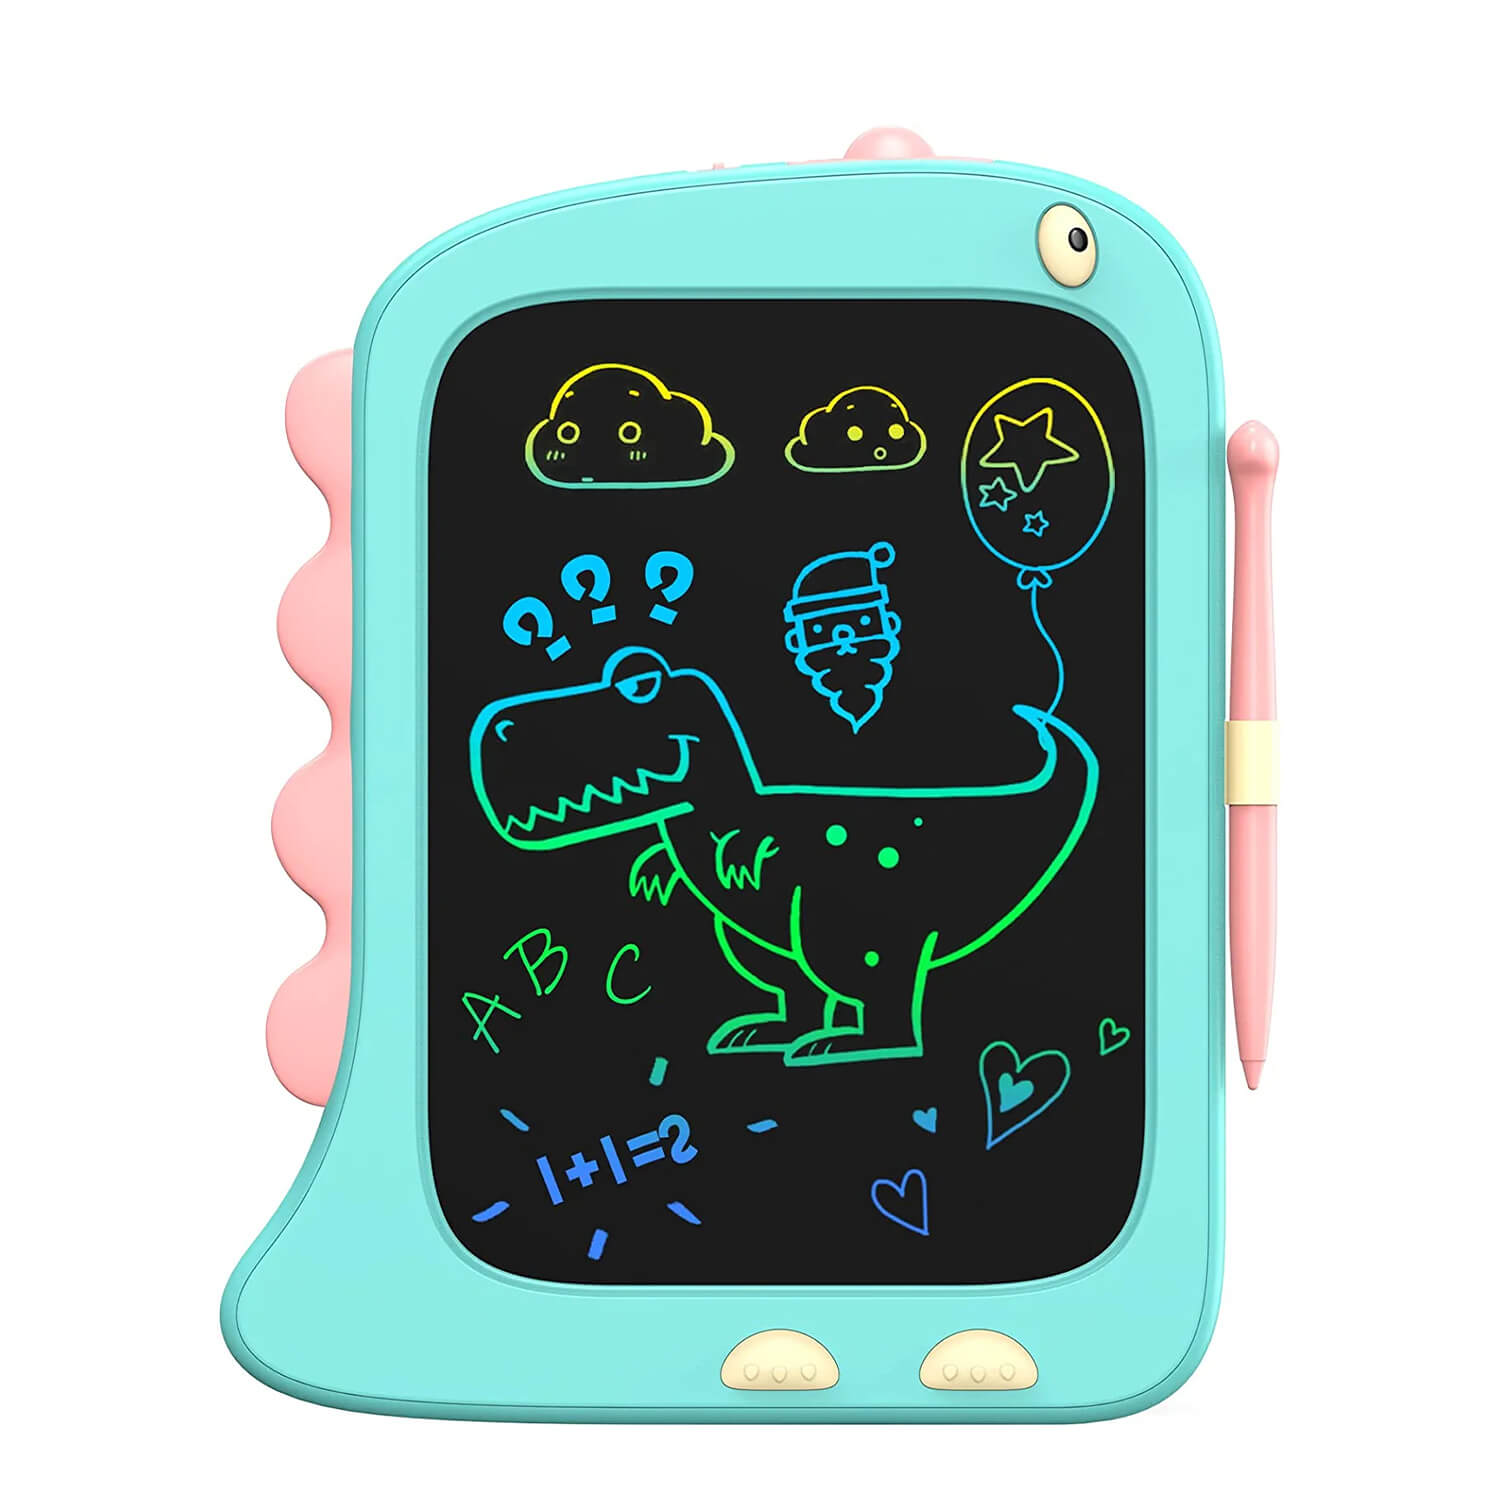 LCD Writing Tablet for Kids, 2Pck Drawing Tablets Toddler Toys Doodle Board  12 inch Writing Pad Drawing Tablet, Boys Girls Gift Trip Travel Essentials